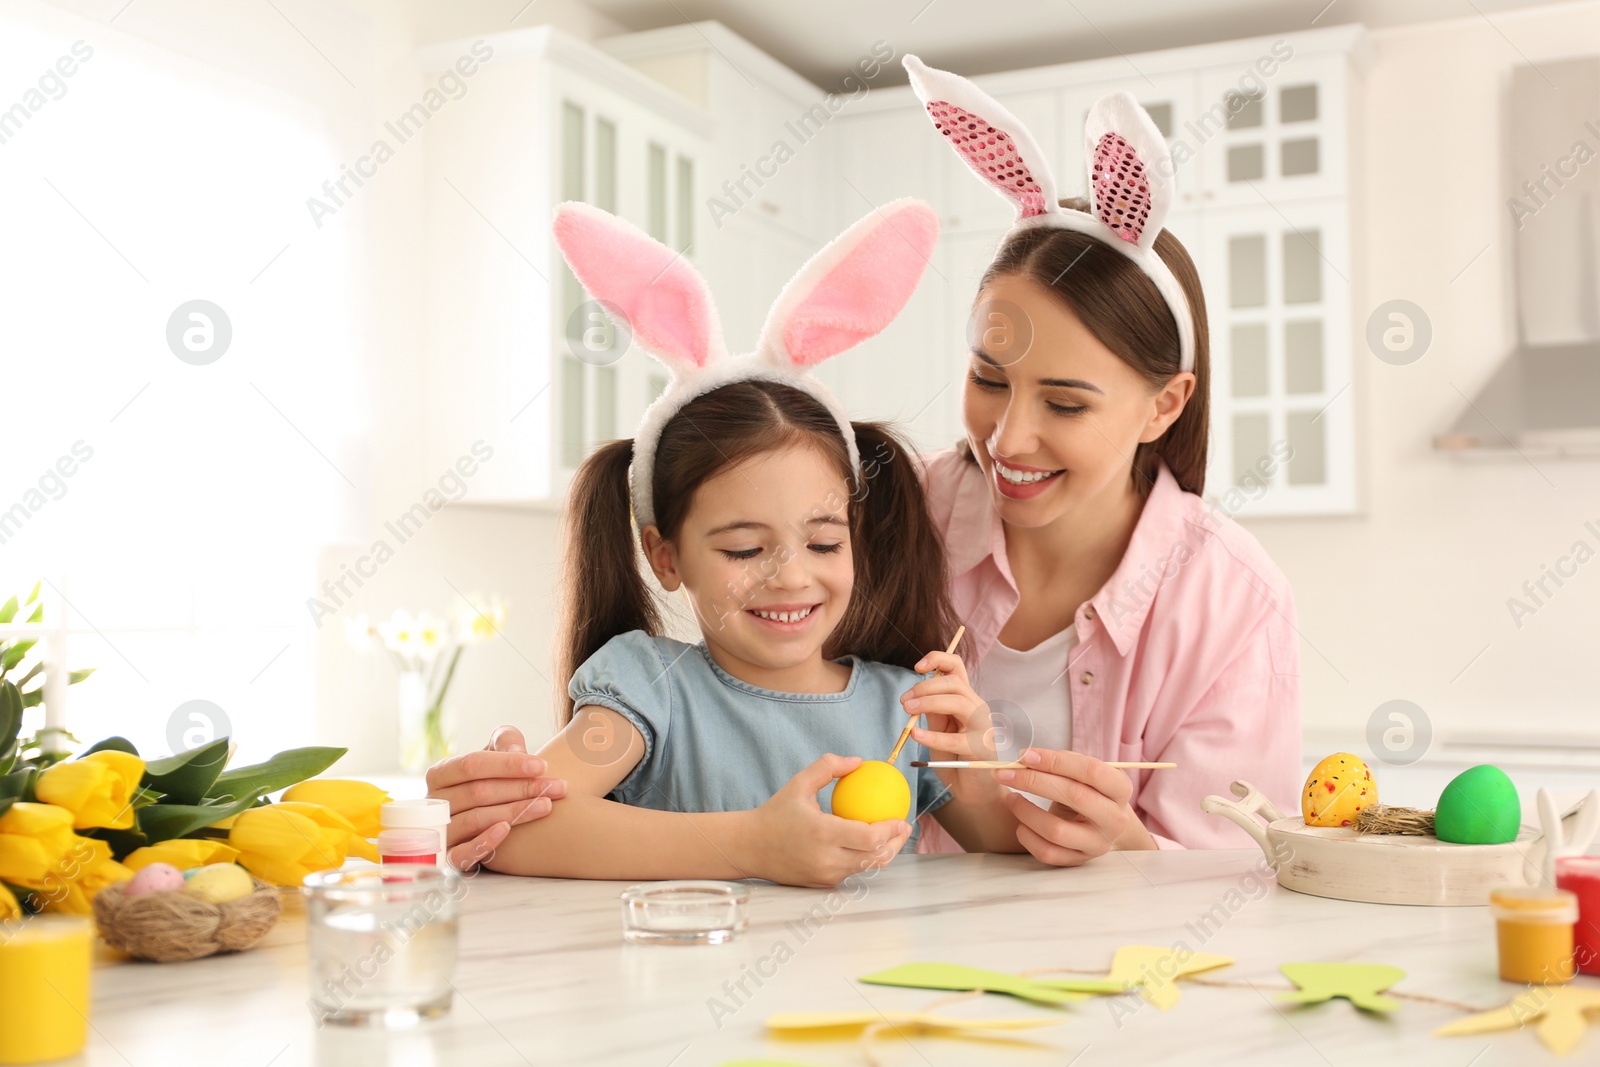 Photo of Happy mother and daughter with bunny ears headbands painting Easter egg in kitchen